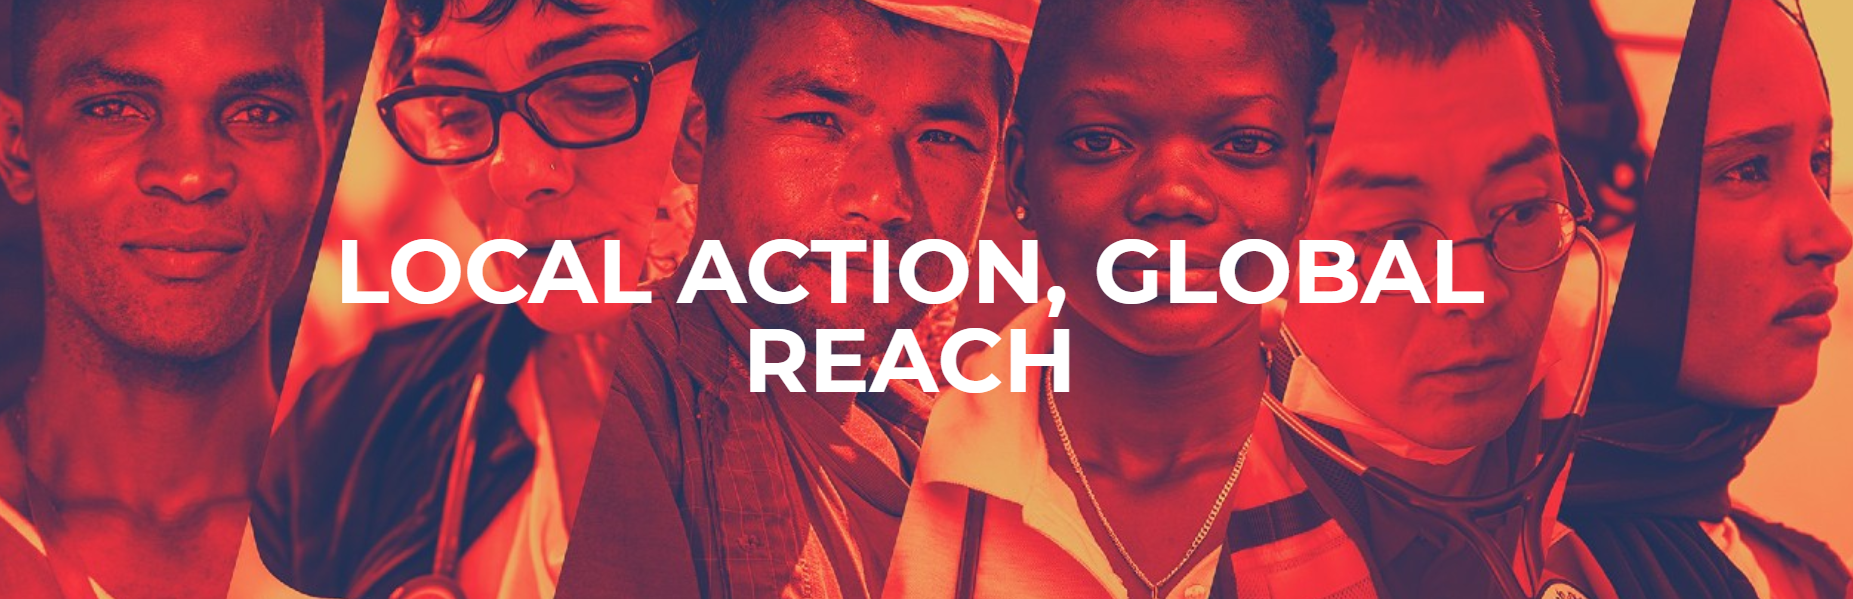 local action, global reach